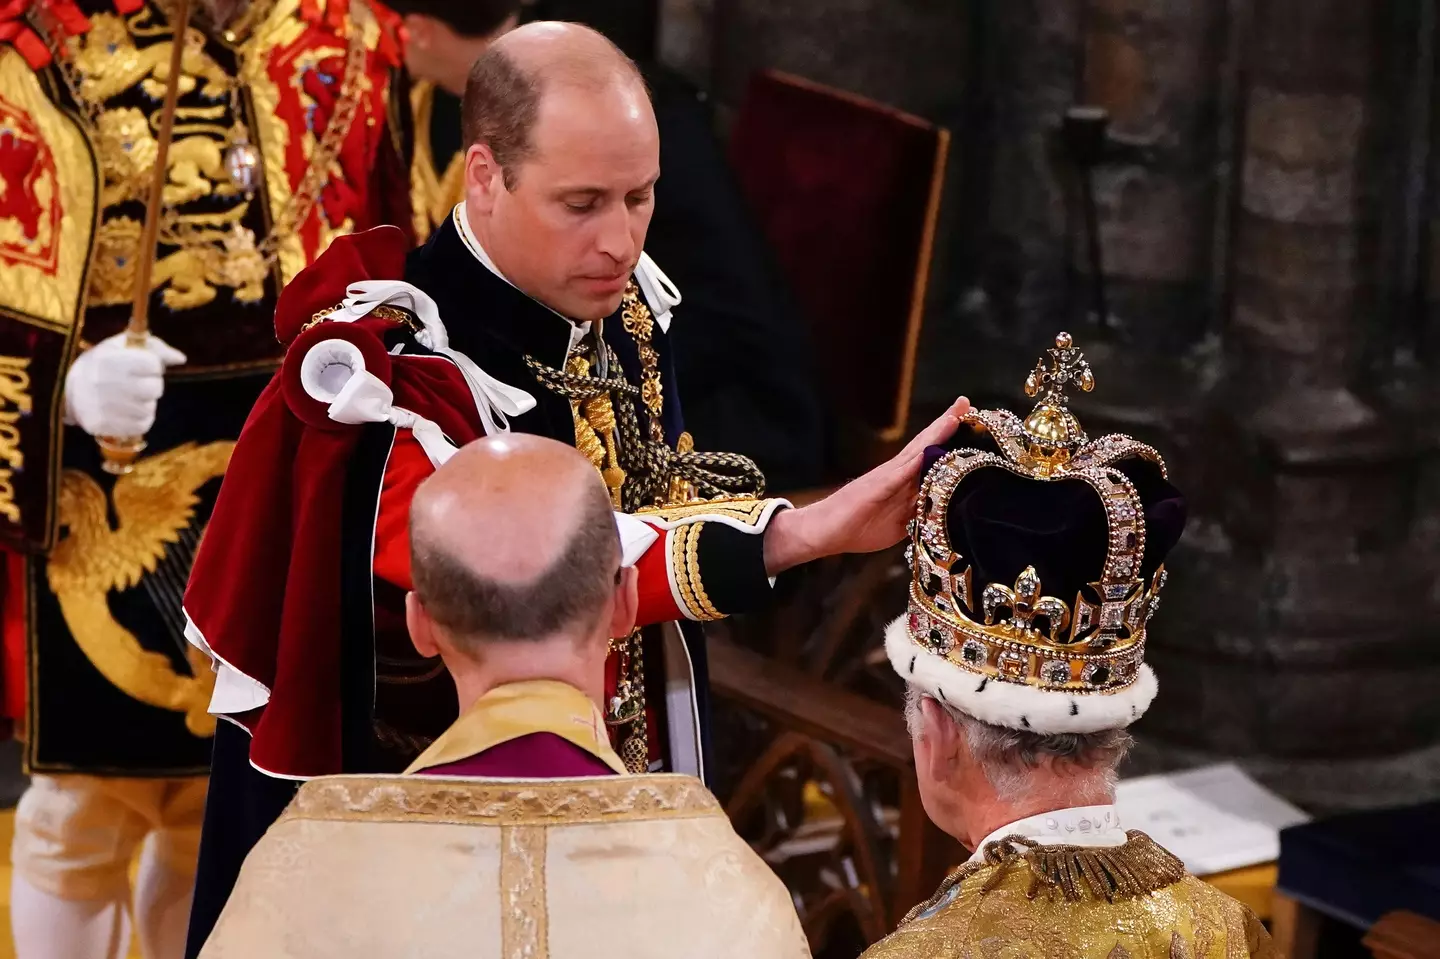 Prince William paid homage to the King during the coronation on Saturday, 6 May.